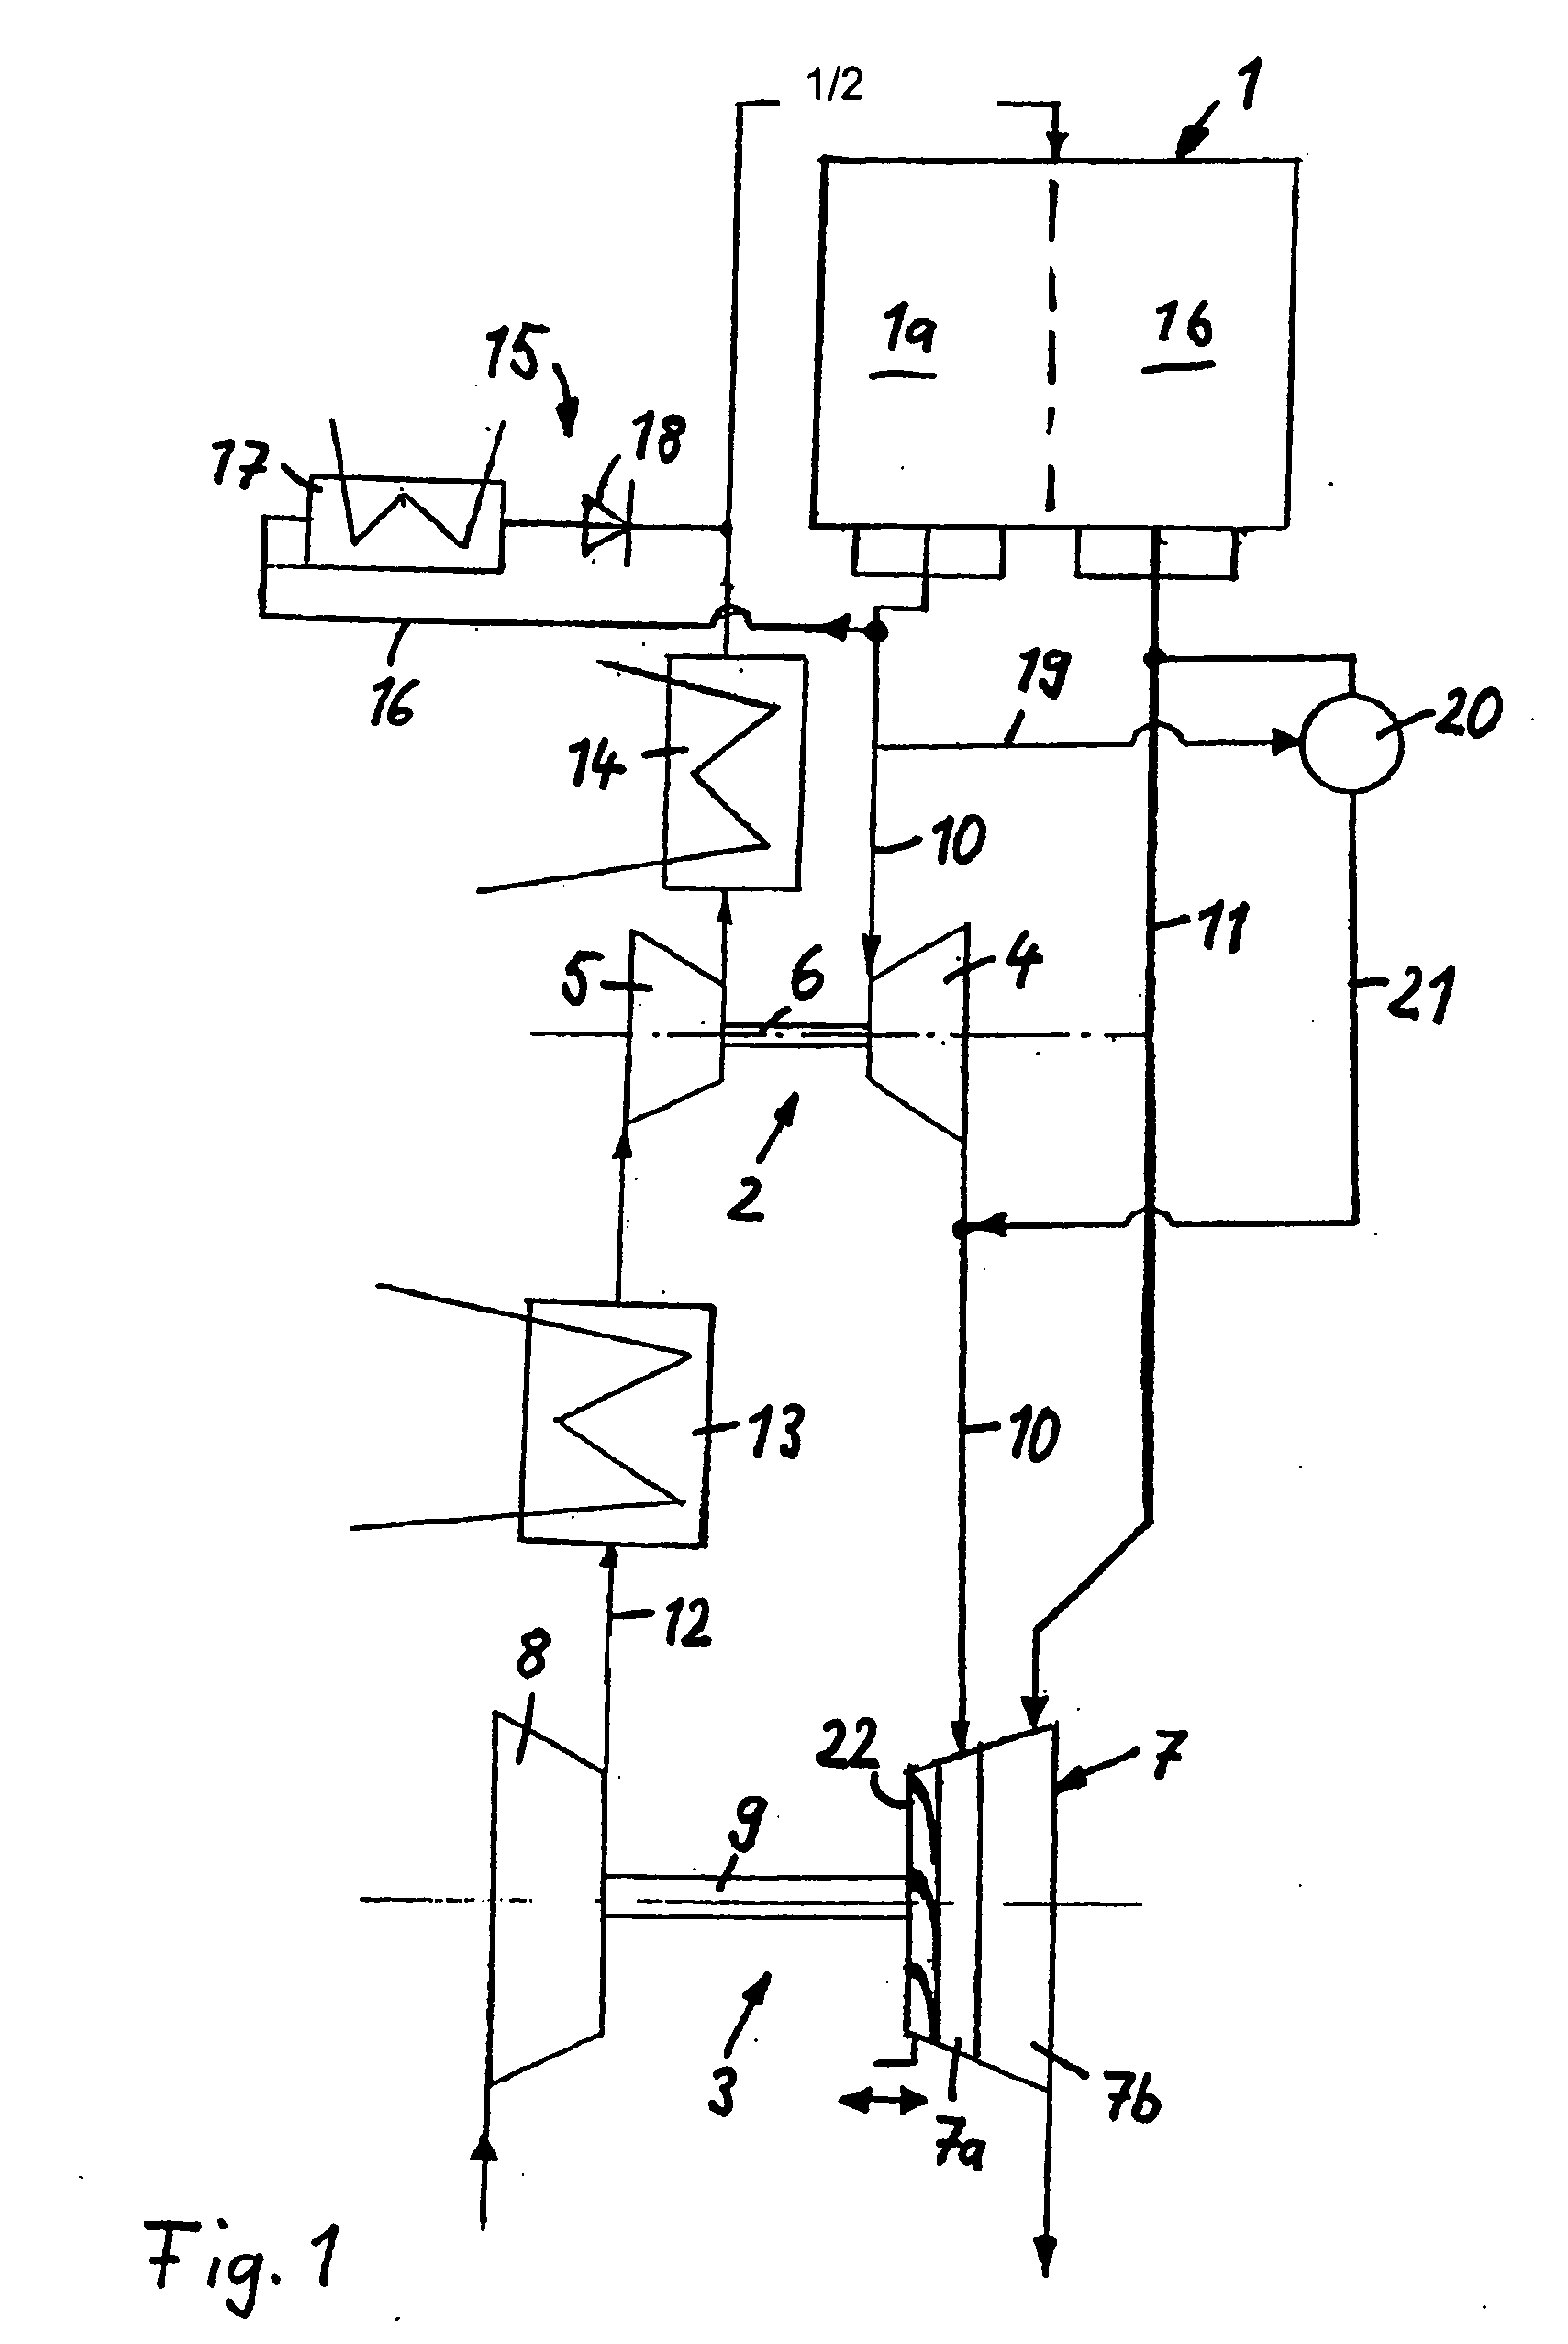 Internal combustion engine having two exhaust gas turbocharger